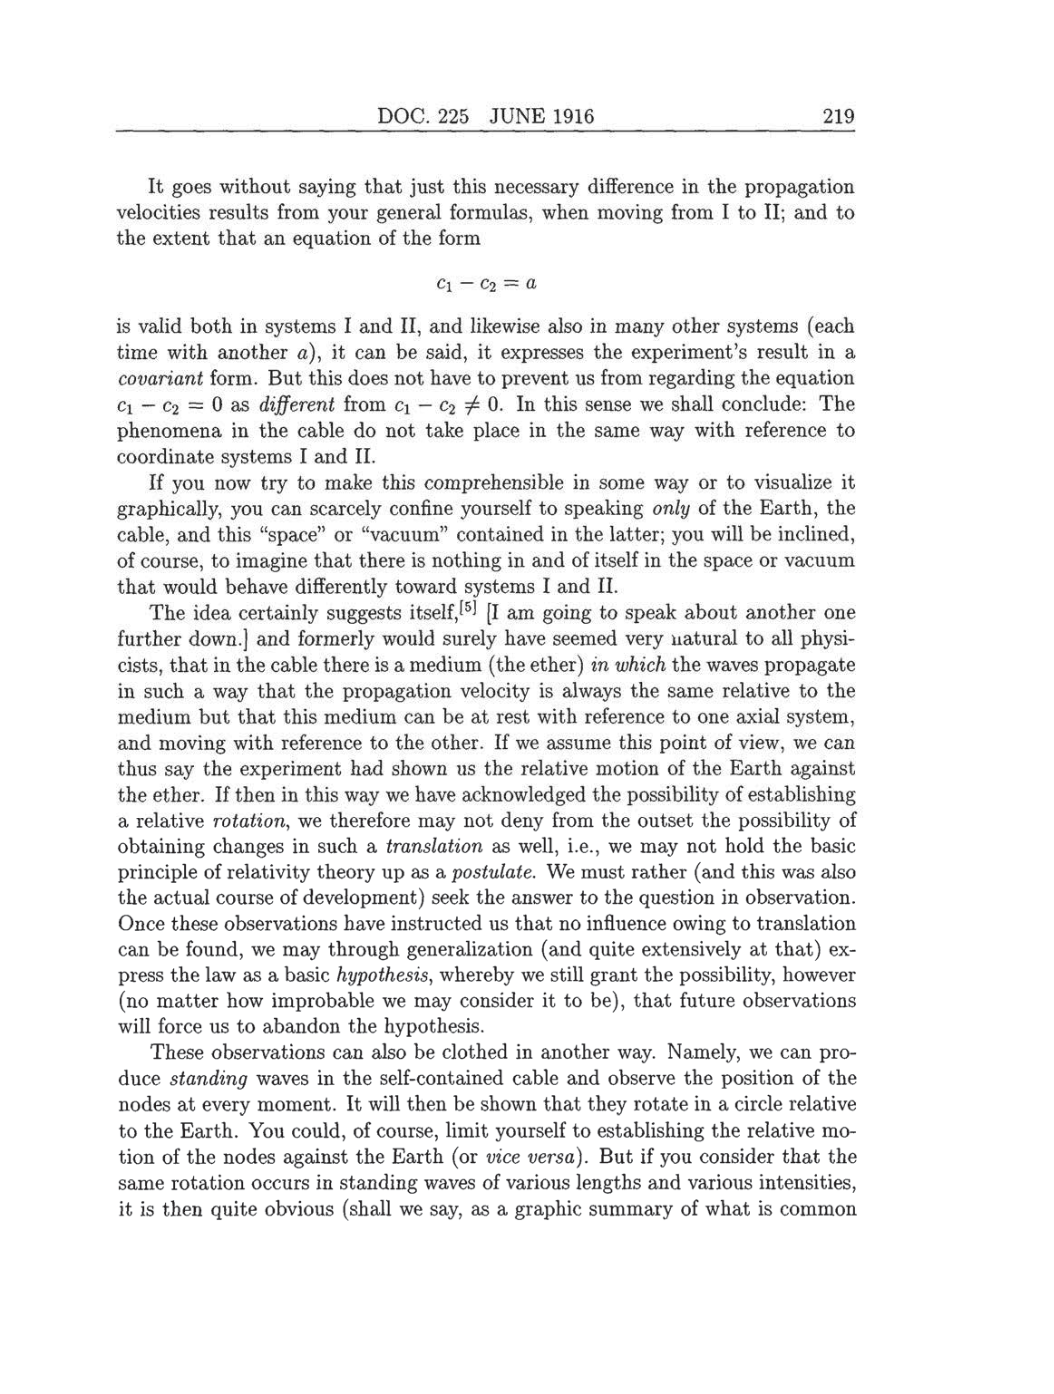 Volume 8: The Berlin Years: Correspondence, 1914-1918 (English translation supplement) page 219